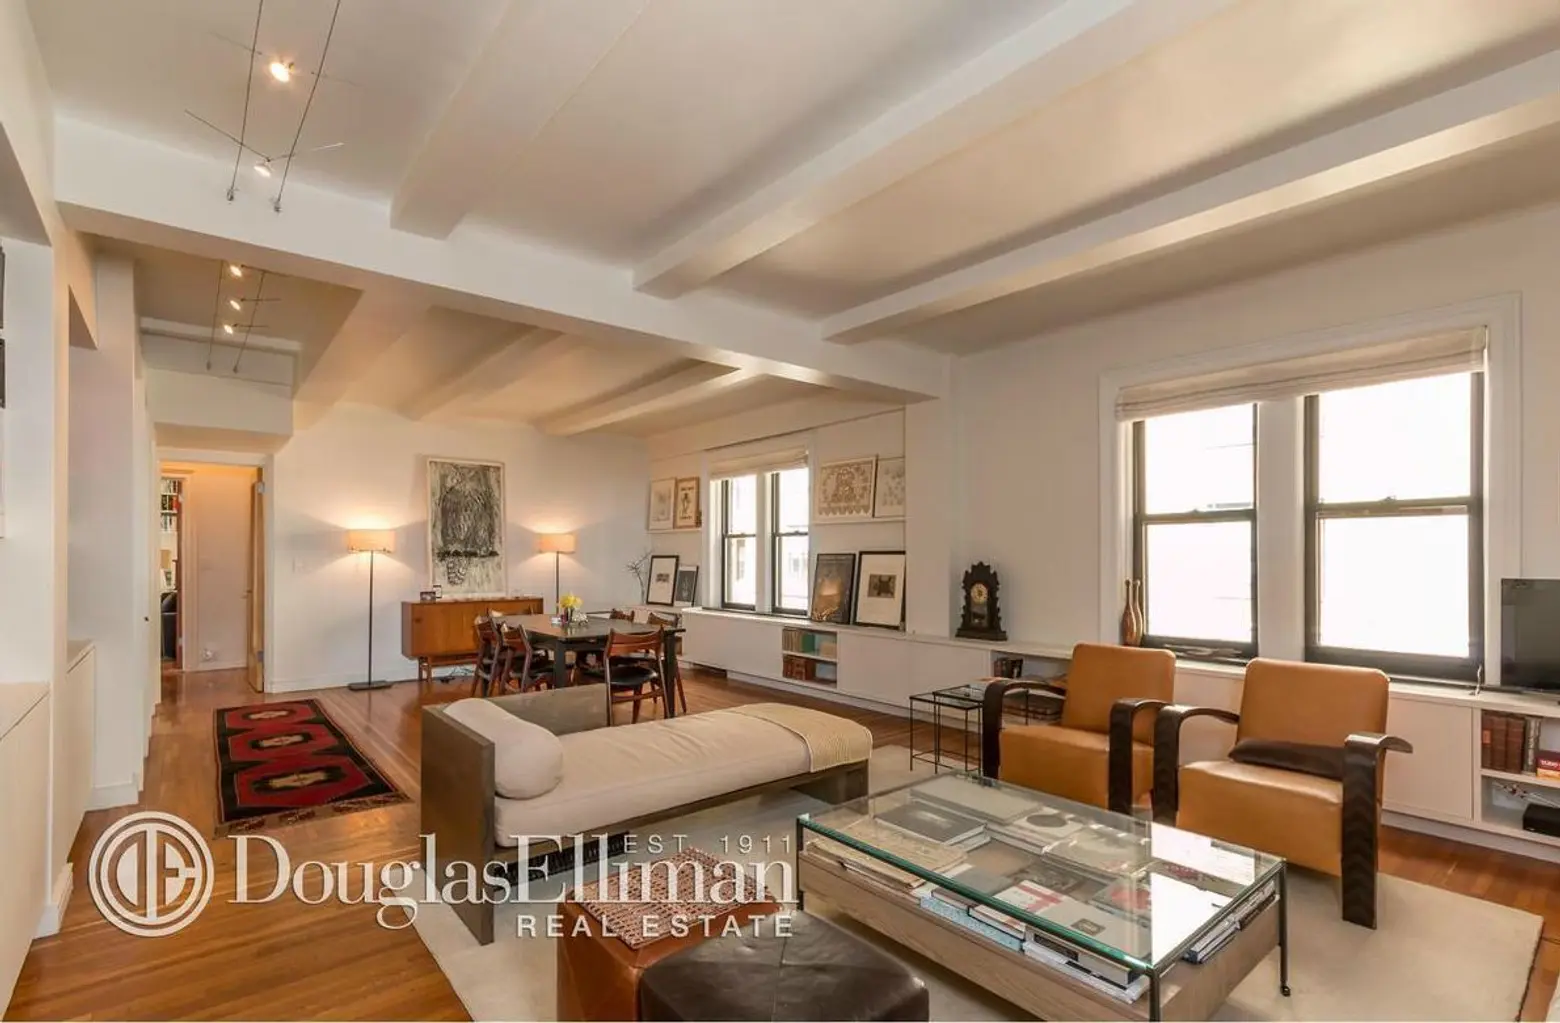 Cookbook Author and New York Times Food Columnist Mark Bittman Gets $1.8M for UWS Co-op